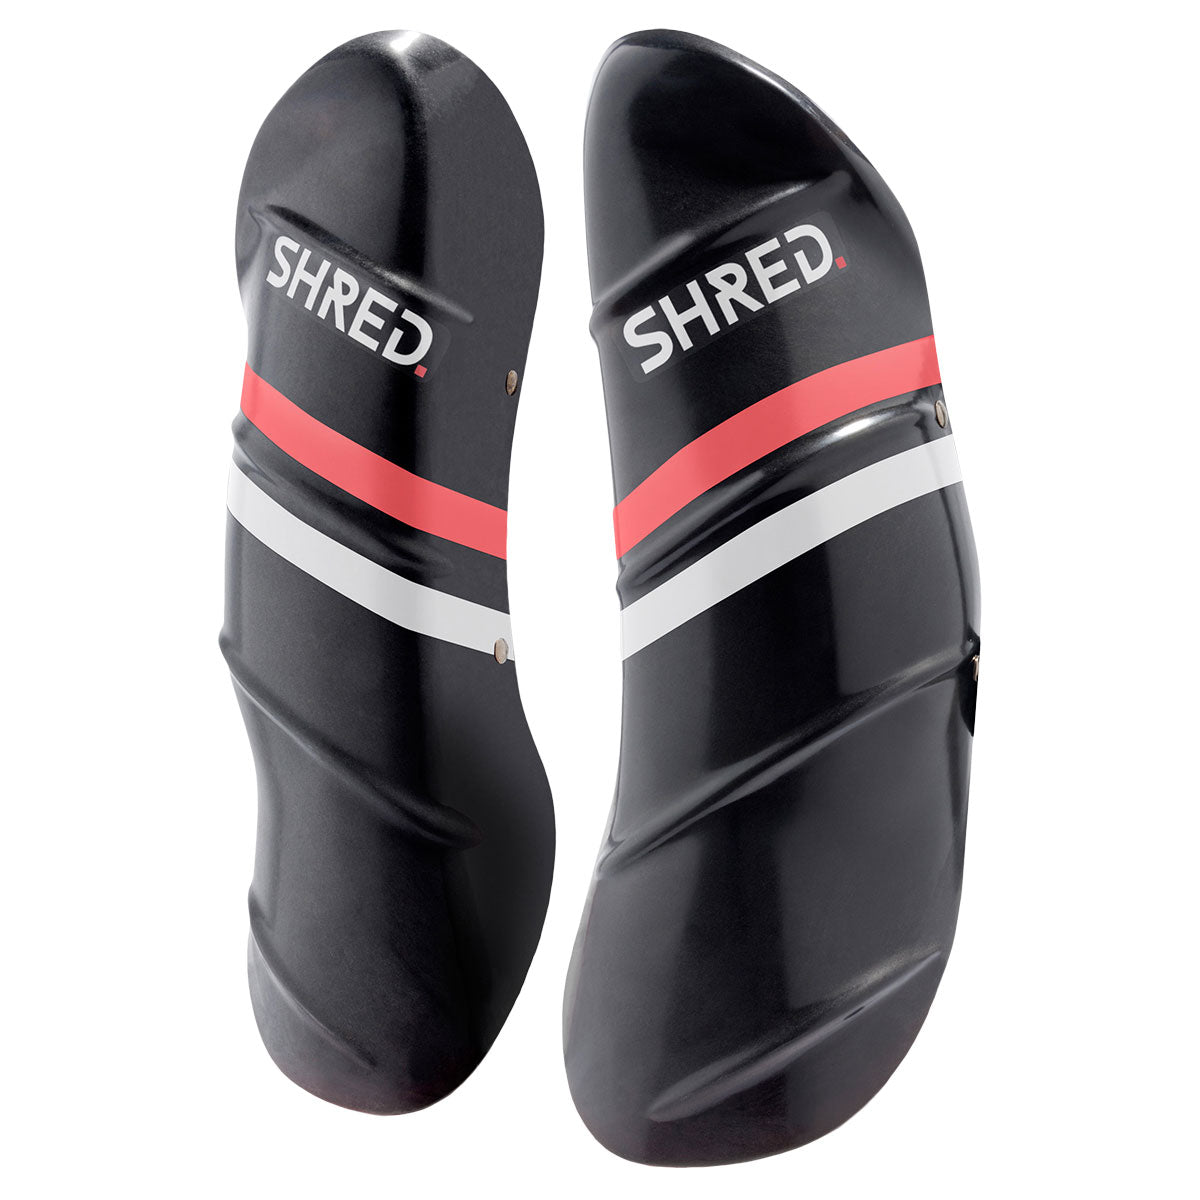 Carbon Athletic Shin Guards Review